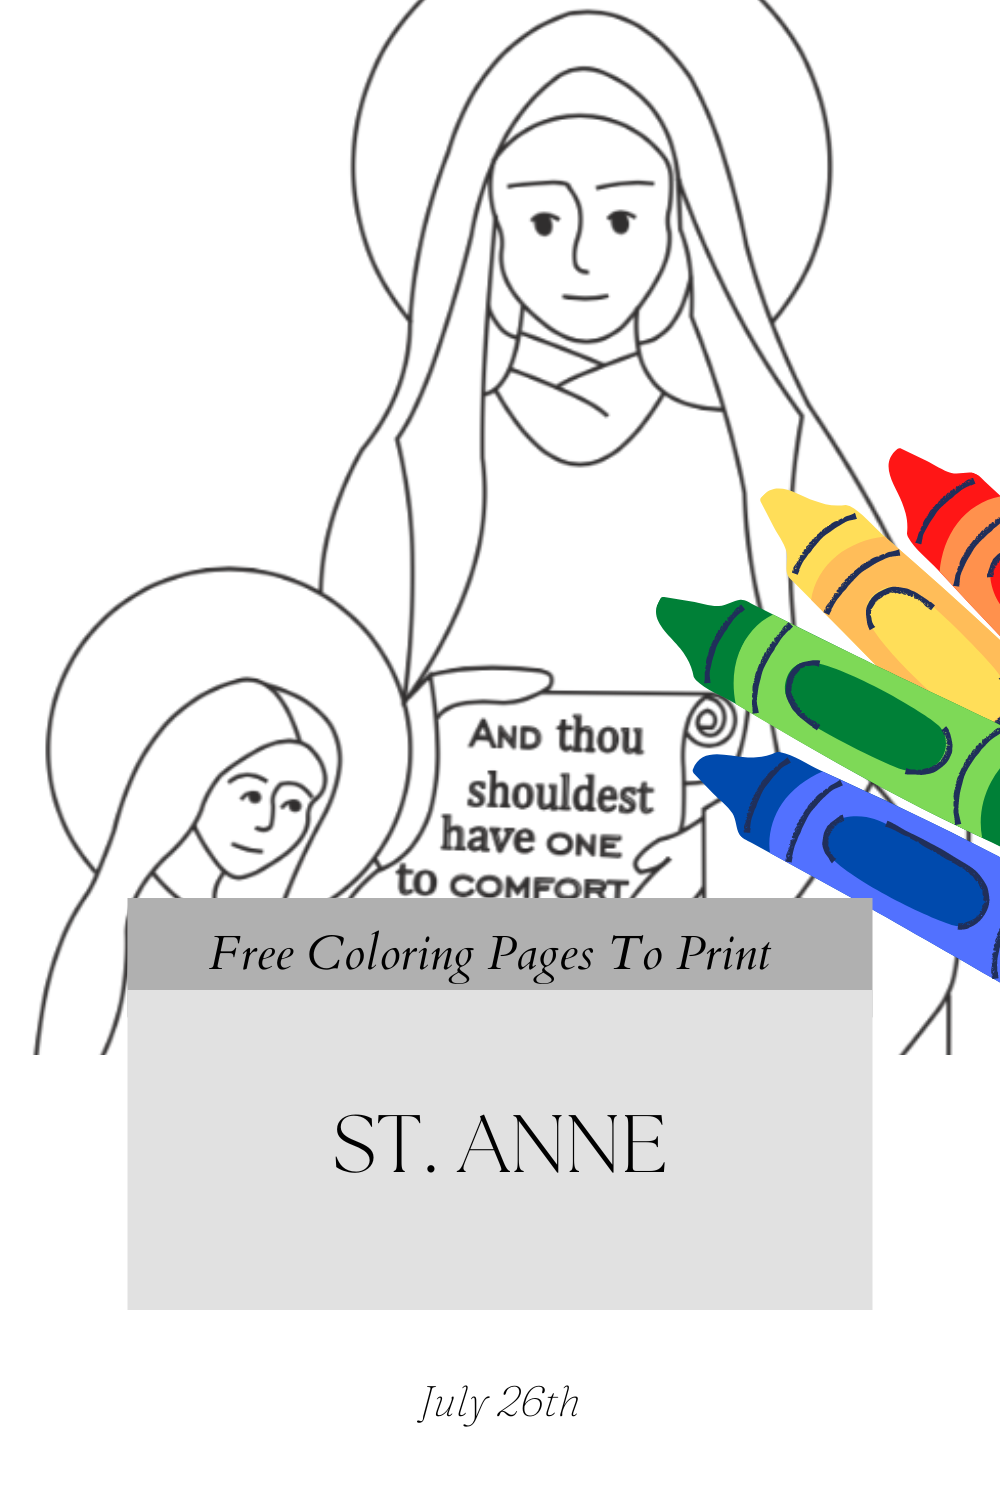 Free coloring pages for catholics